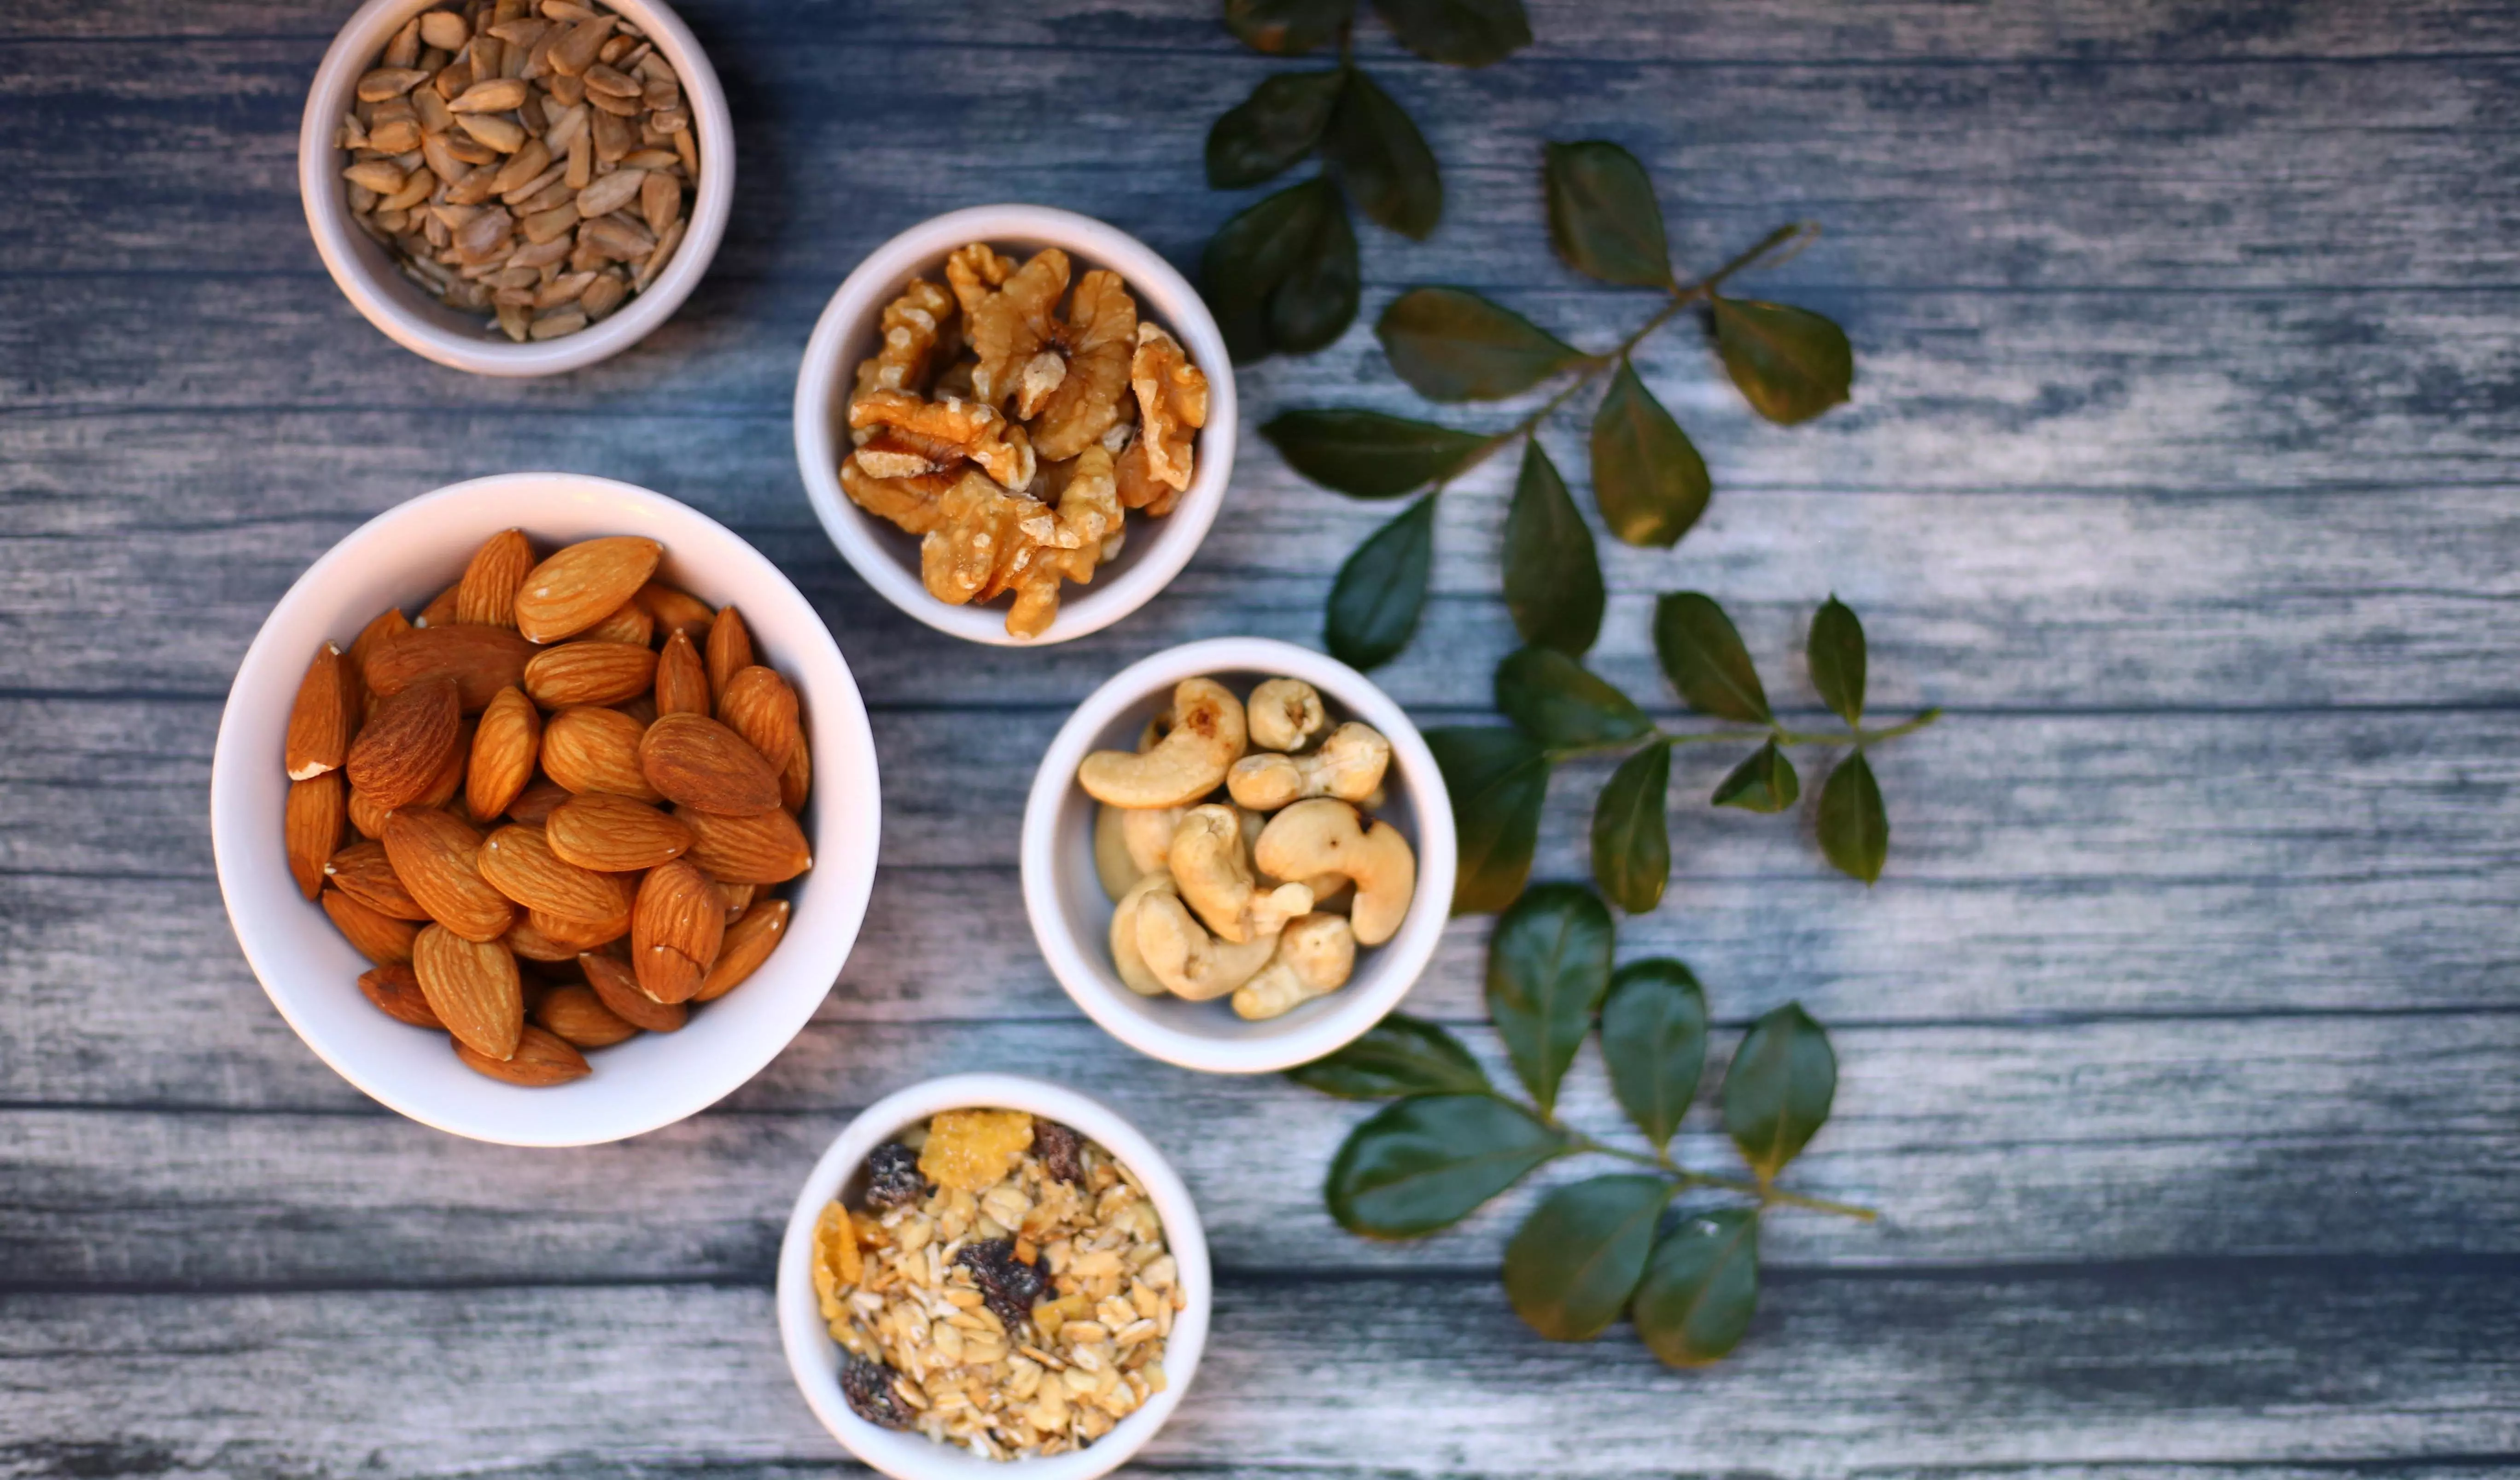 Are you storing your dried fruits and nuts right?